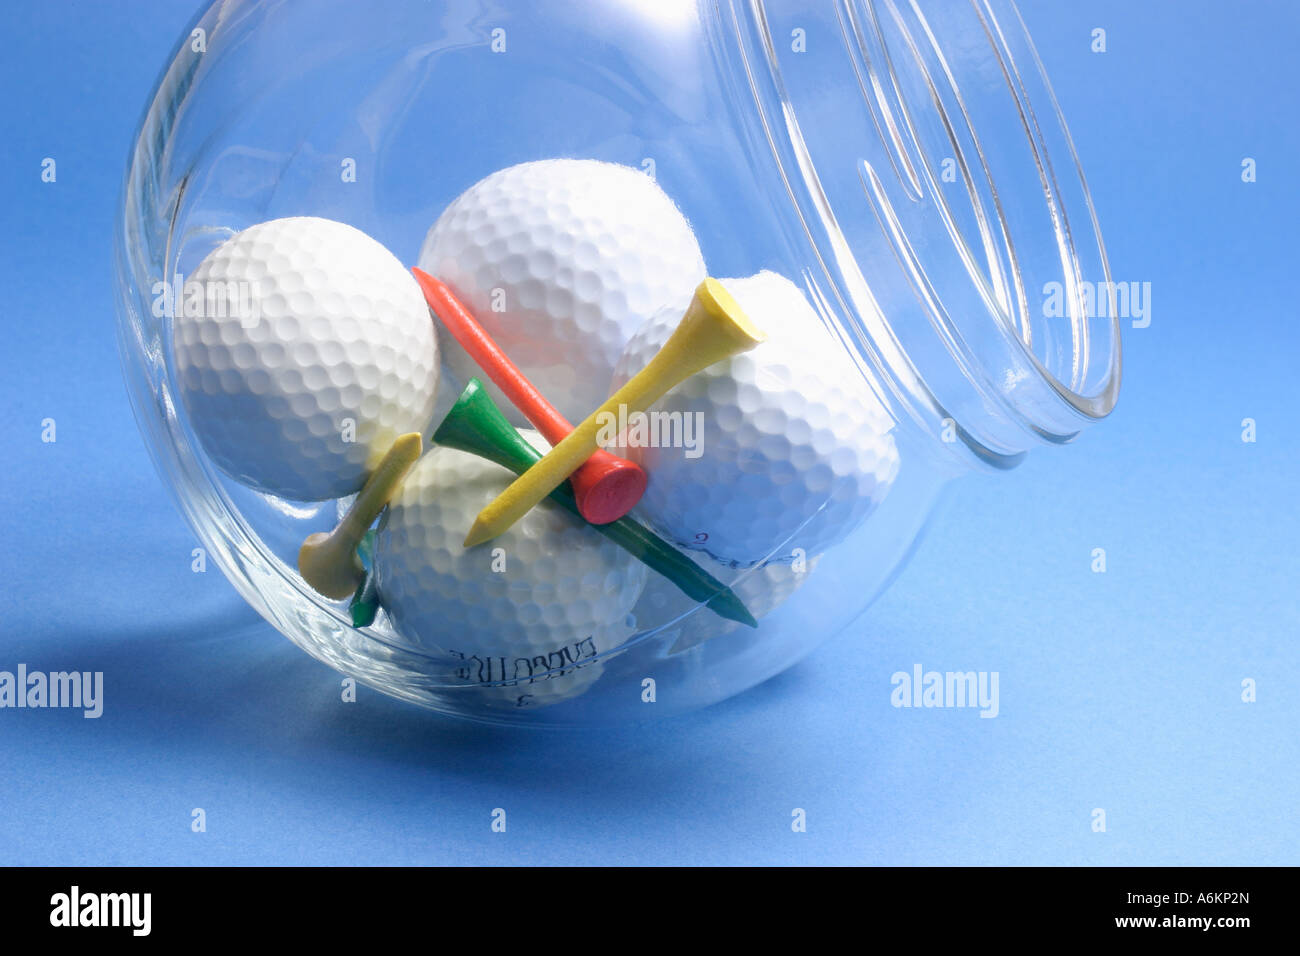 Golf Balls and Tees in Glass Jar Stock Photo - Alamy